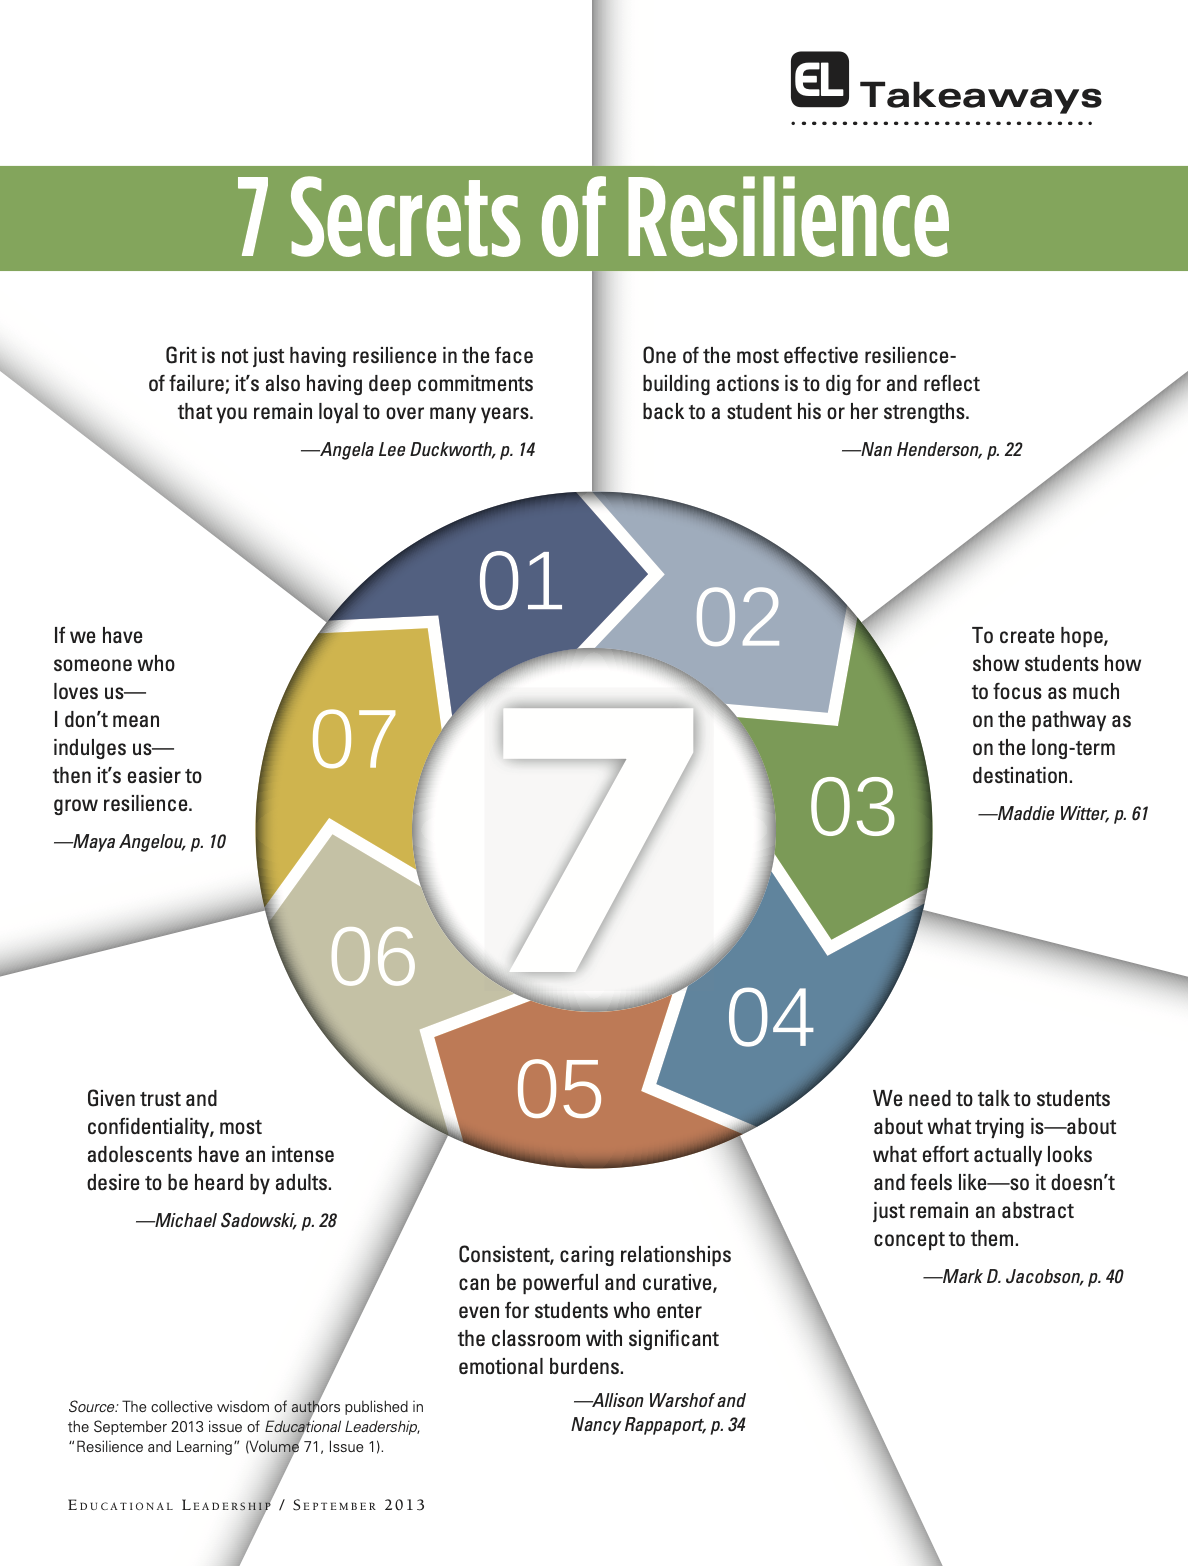 7 Secrets of Resilience